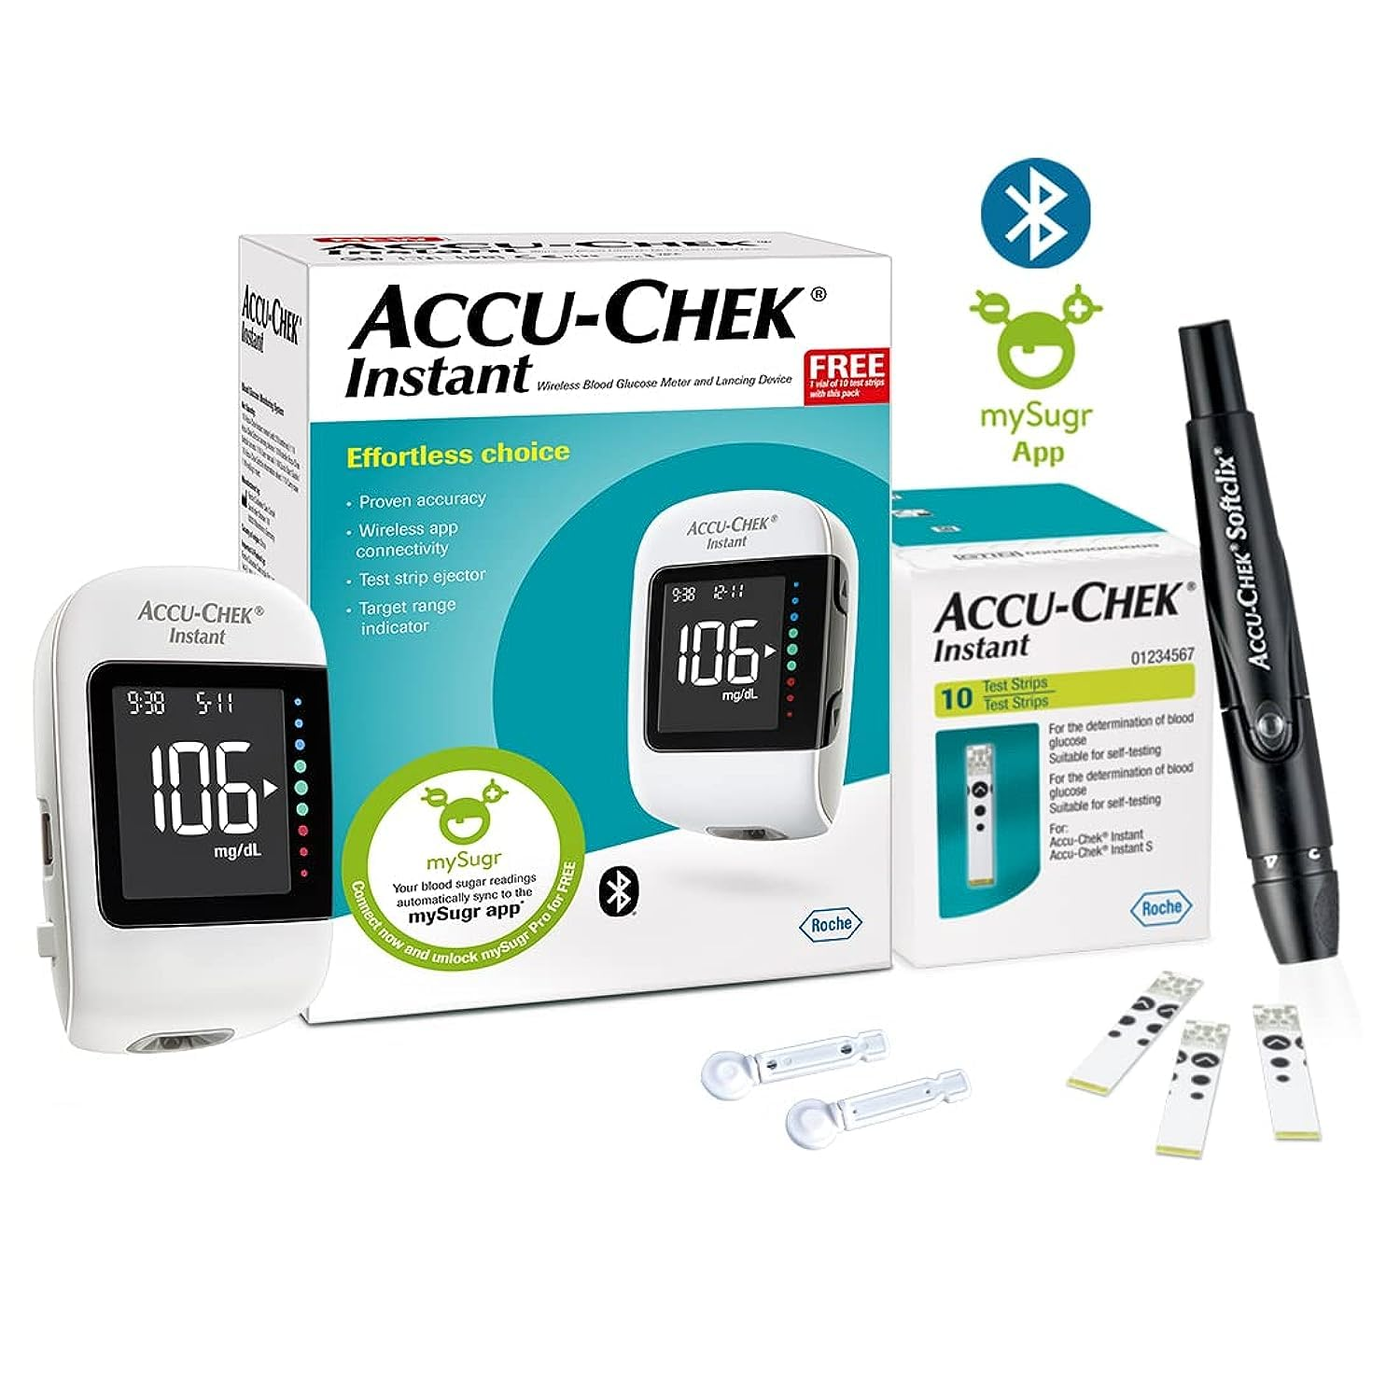 Accu-Chek Instant Meter With Blue Tooth Technology With 20 Strips Free